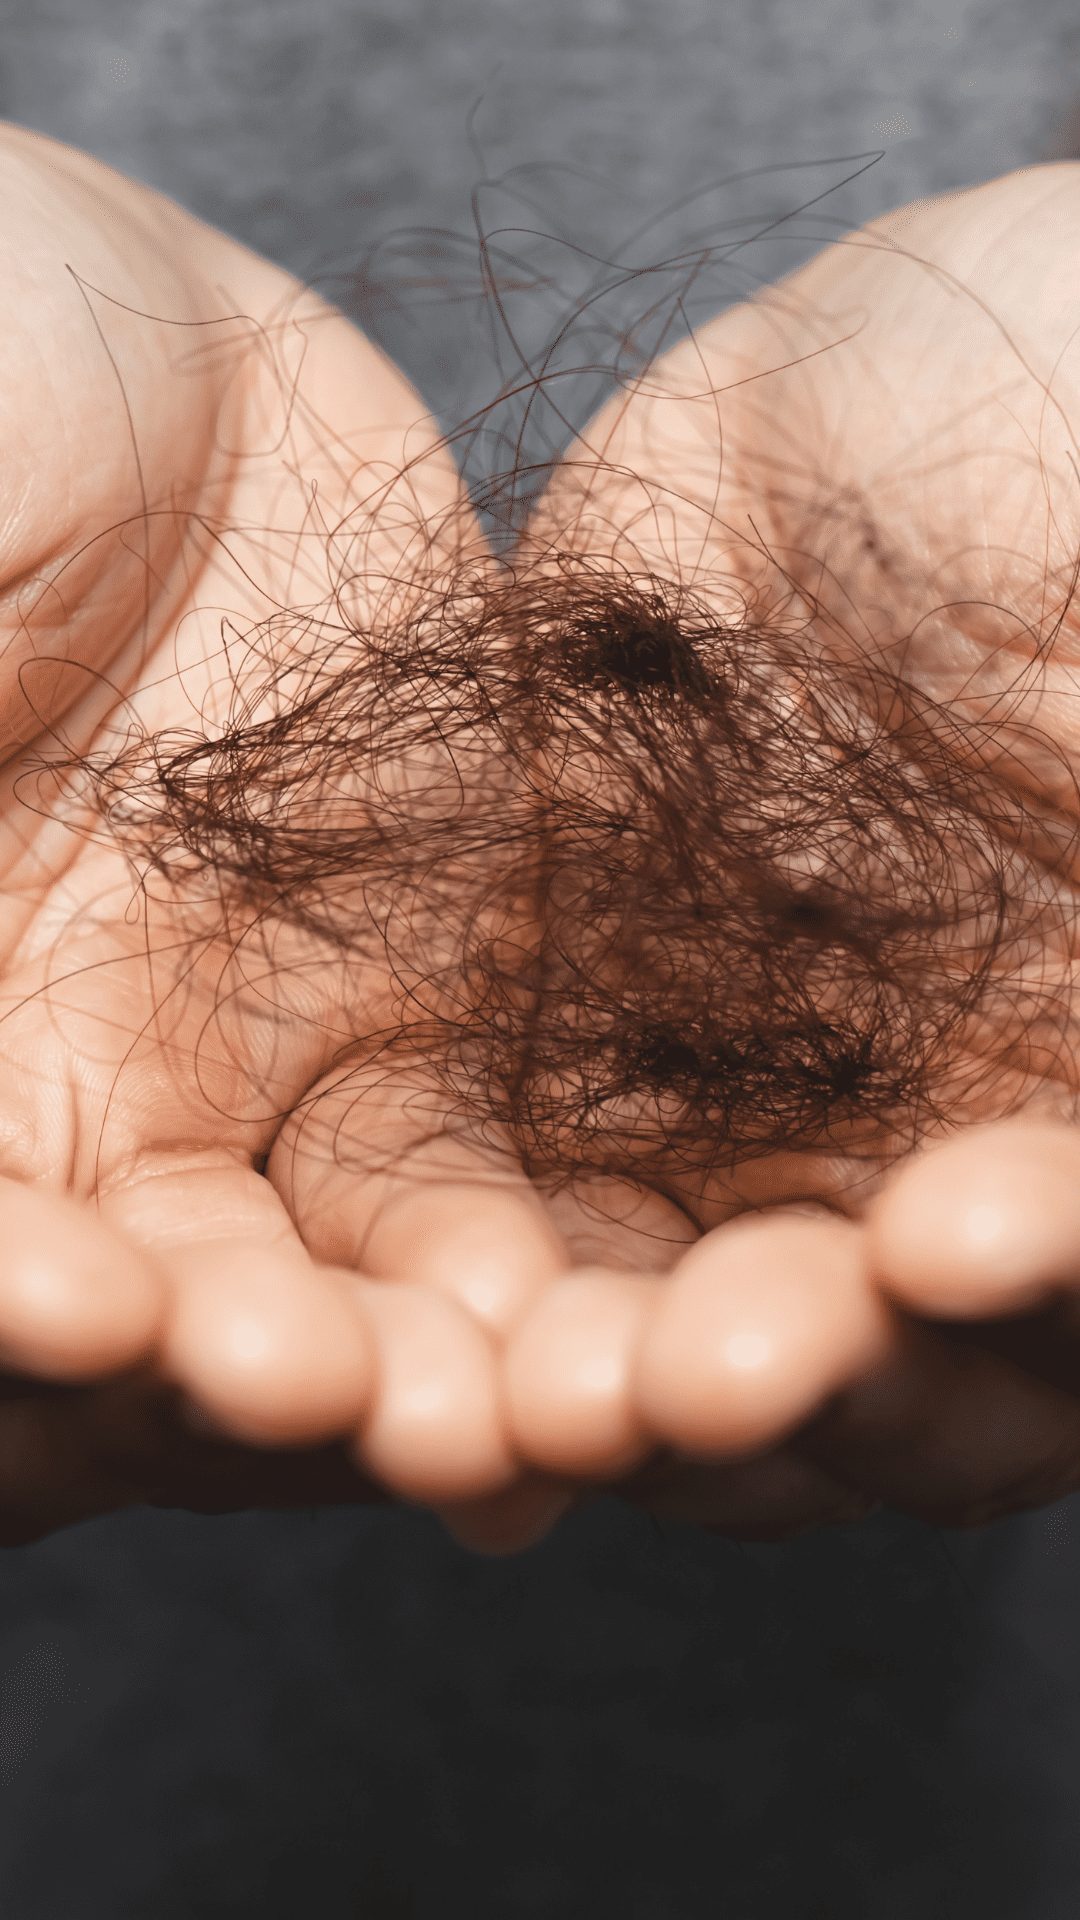 The increase in hair shedding and loss as a result of anti depressant drugs